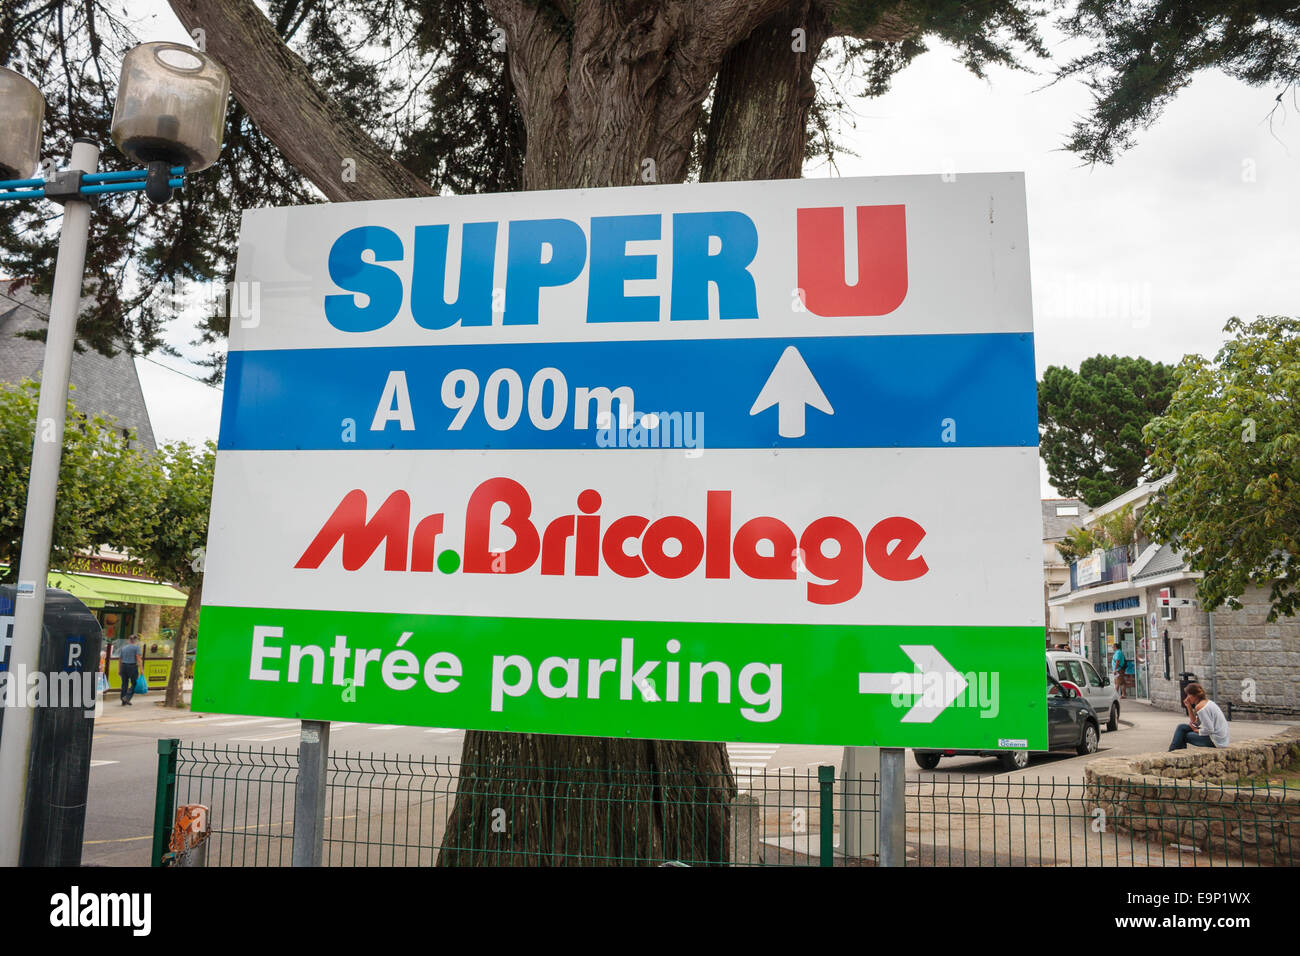 Super U and Mr Bricolage sign at Carnac, Brittany, France Stock Photo